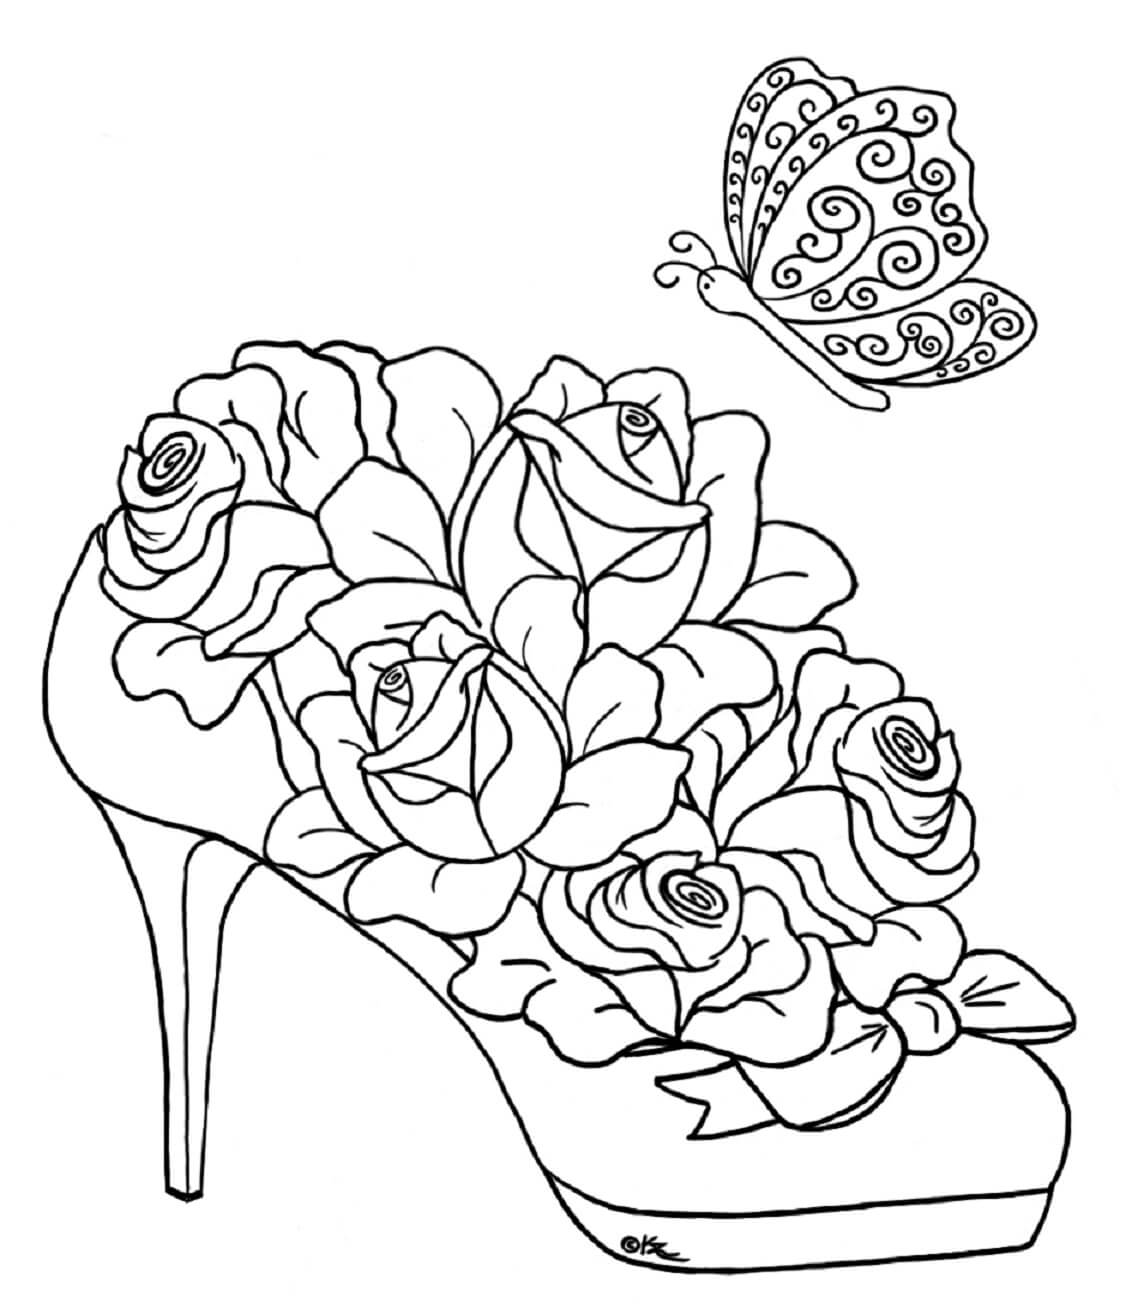 Mandala Roses in Shoe With Butterfly Coloring Page Mandalas